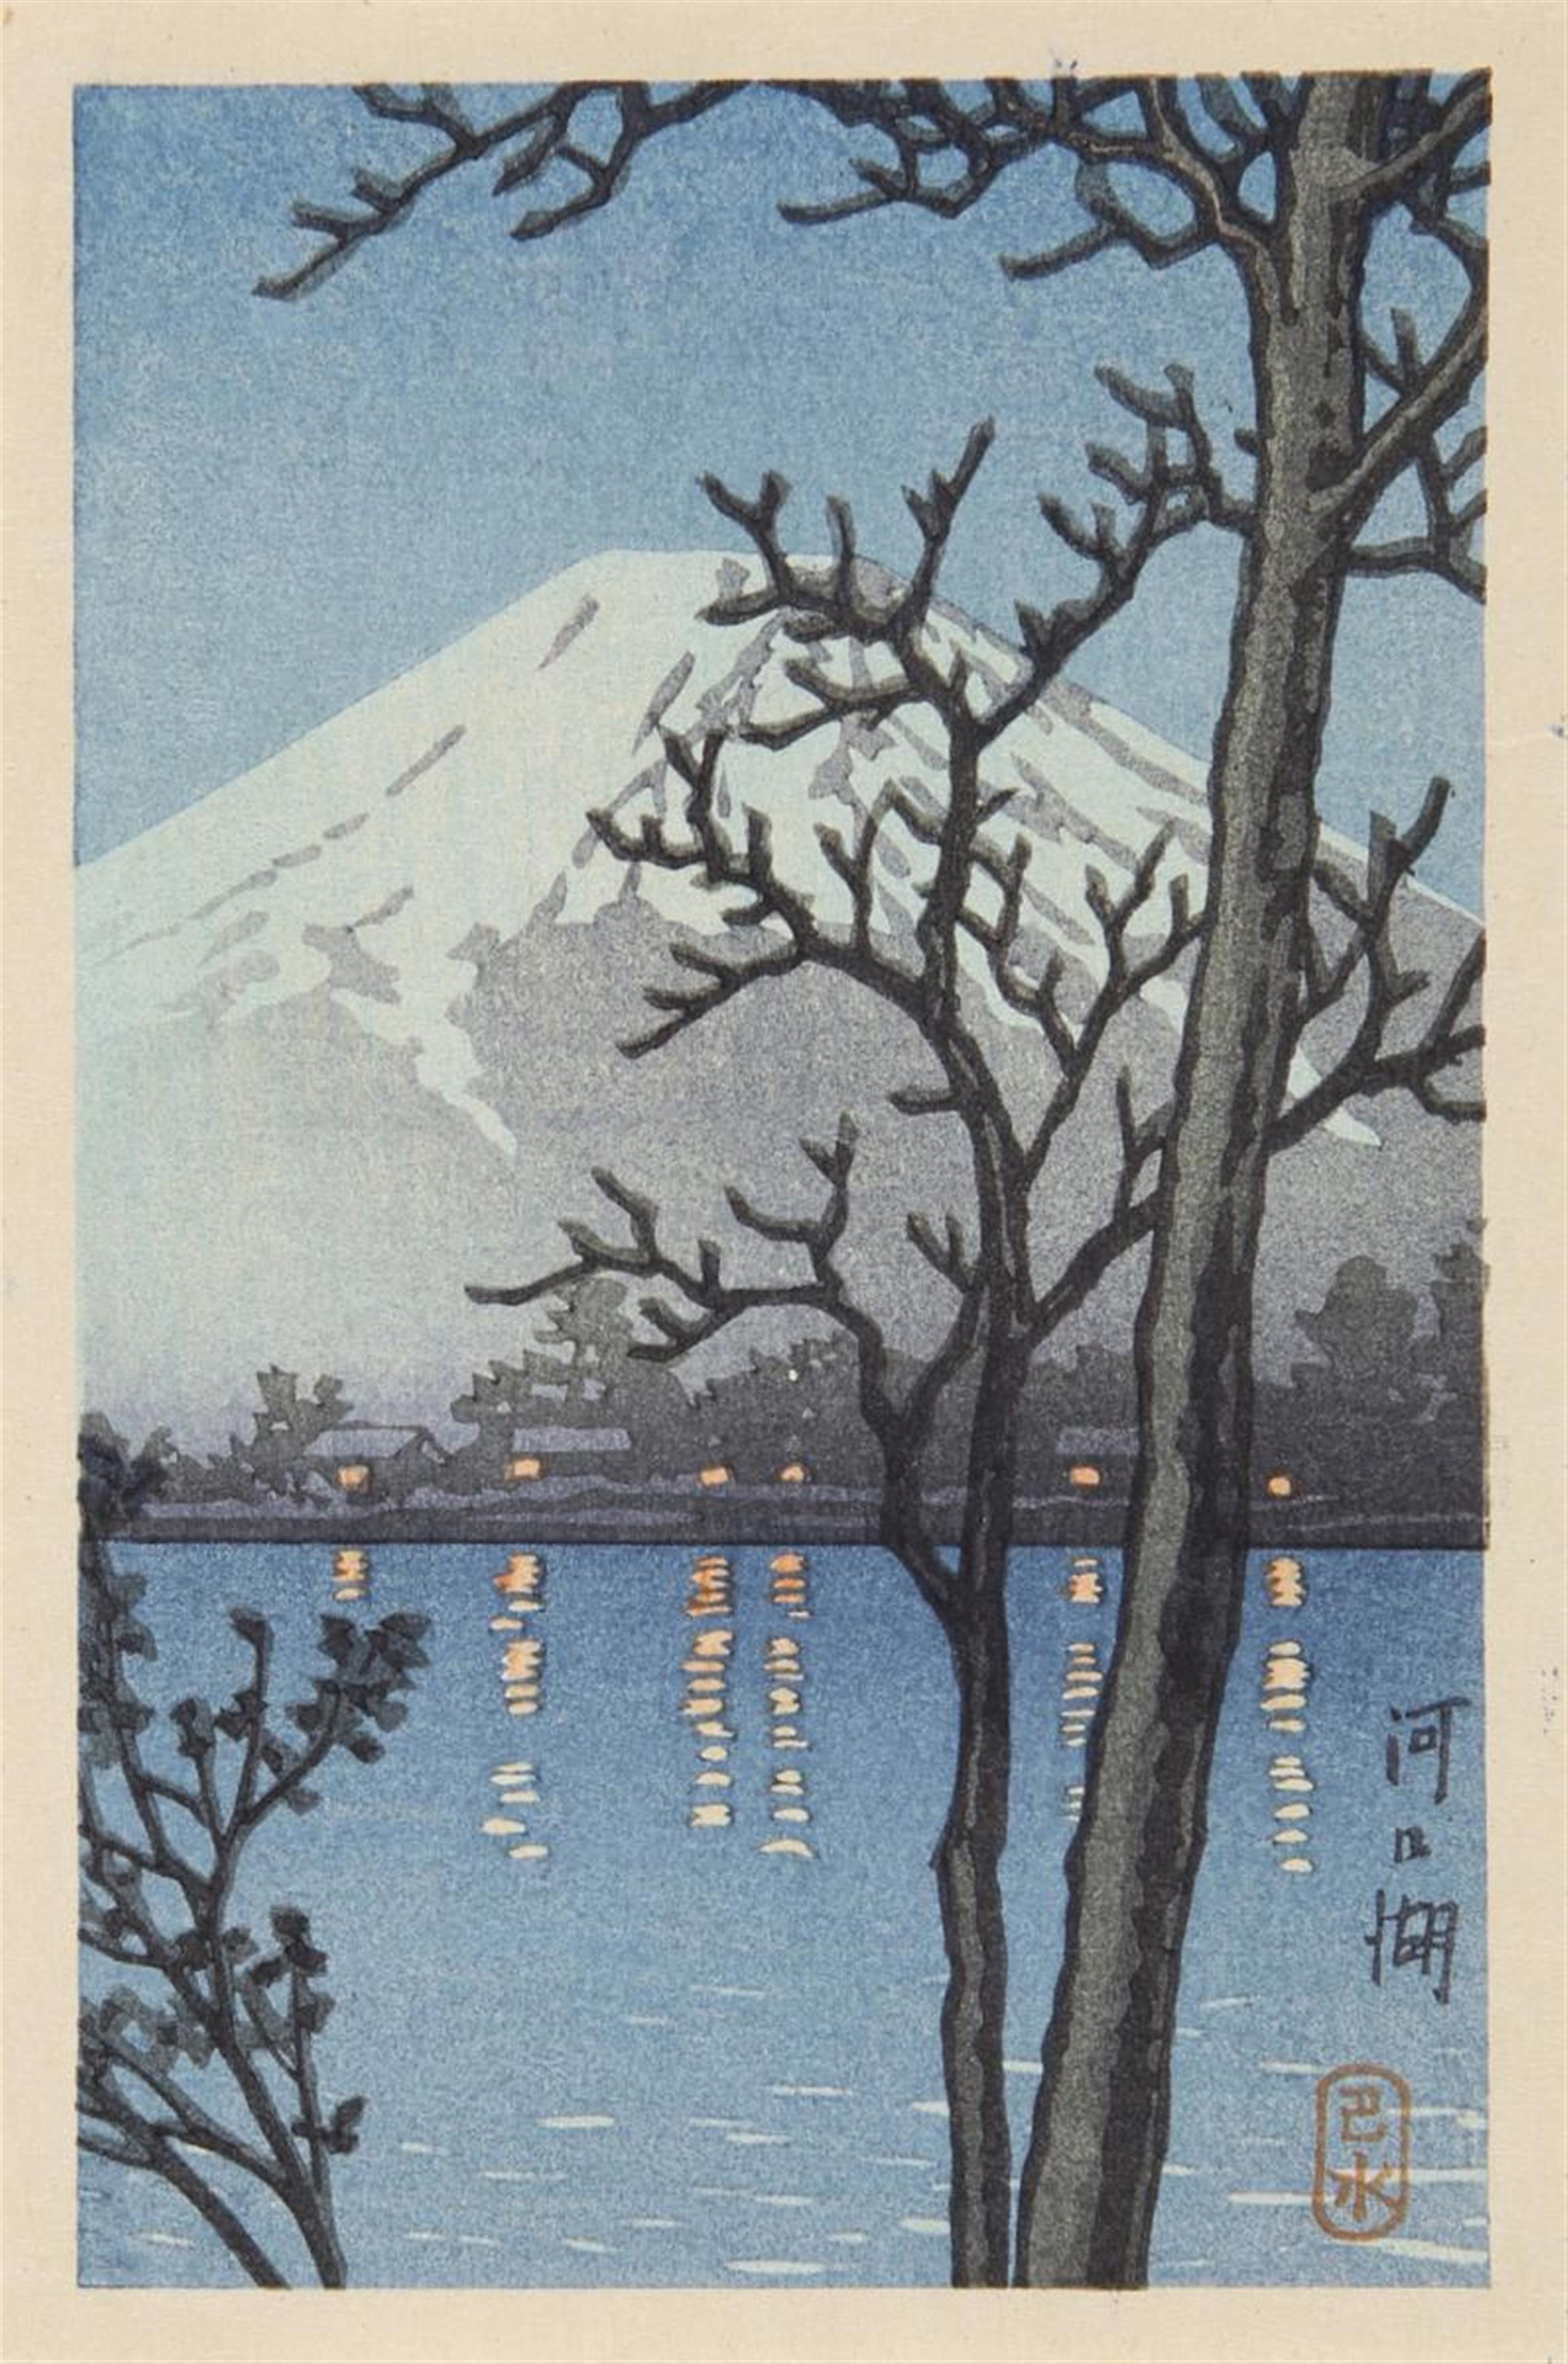 Kawase Hasui - Group of 18 postcard prints. Different sizes (17.7 x 11.5 cm; 15.7 x 10.5 cm; 9.9 x 15 cm) and one double postcard format. Landscapes and cityscapes through the seasons. Seals: ... - image-7